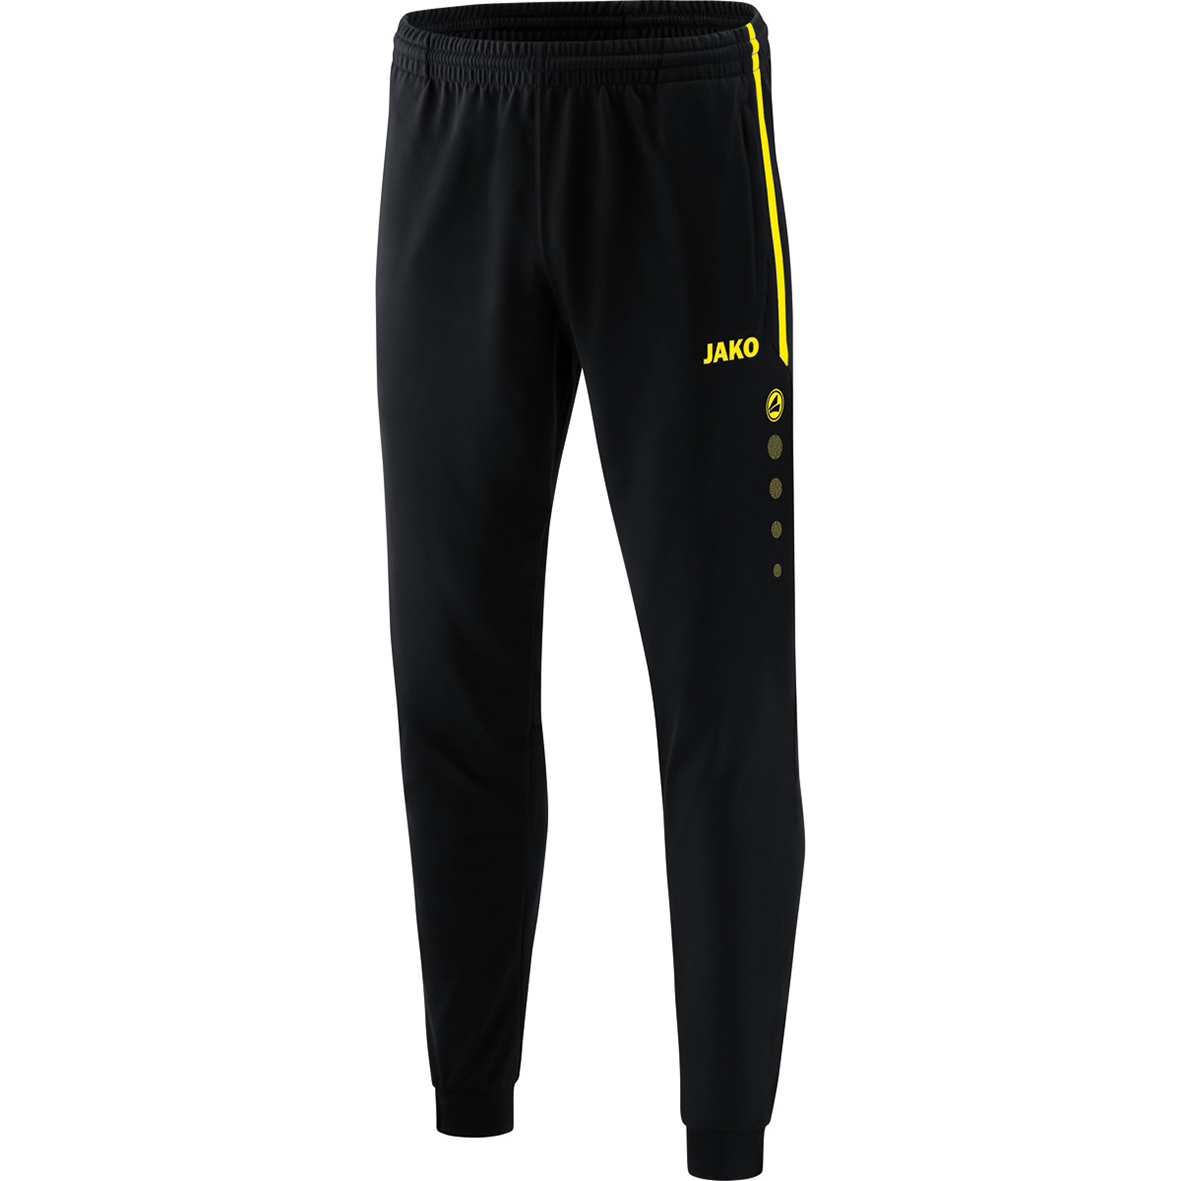 TROUSERS JAKO COMPETITION 2.0, BLACK-nNEON YELLOW KIDS.